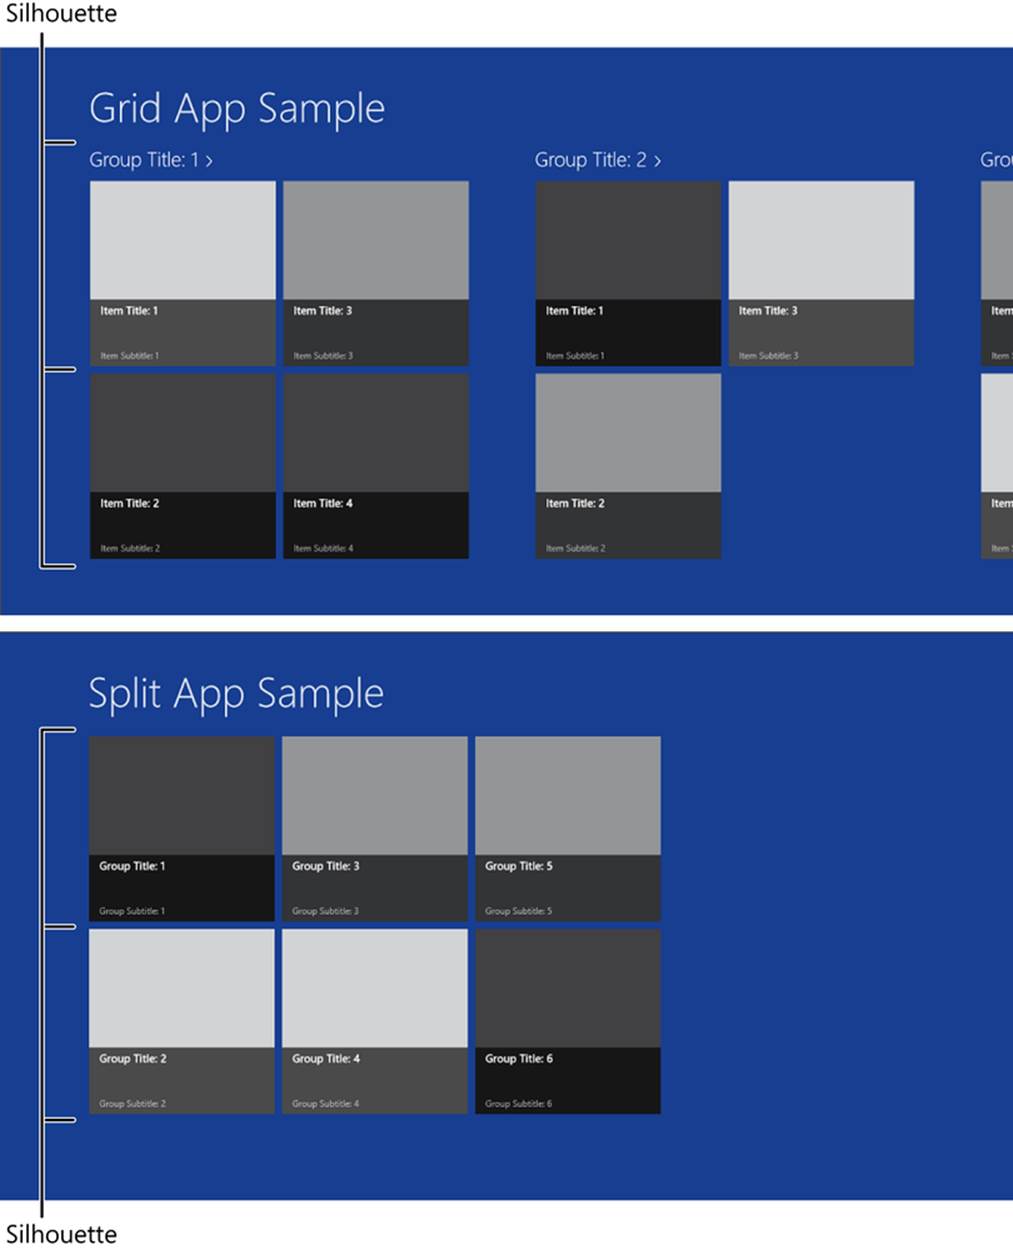 Screenshots of the Visual Studio Grid App template (top) and the Split App template (bottom). A callout points to the top, left, and bottom silhouettes in each screenshot.